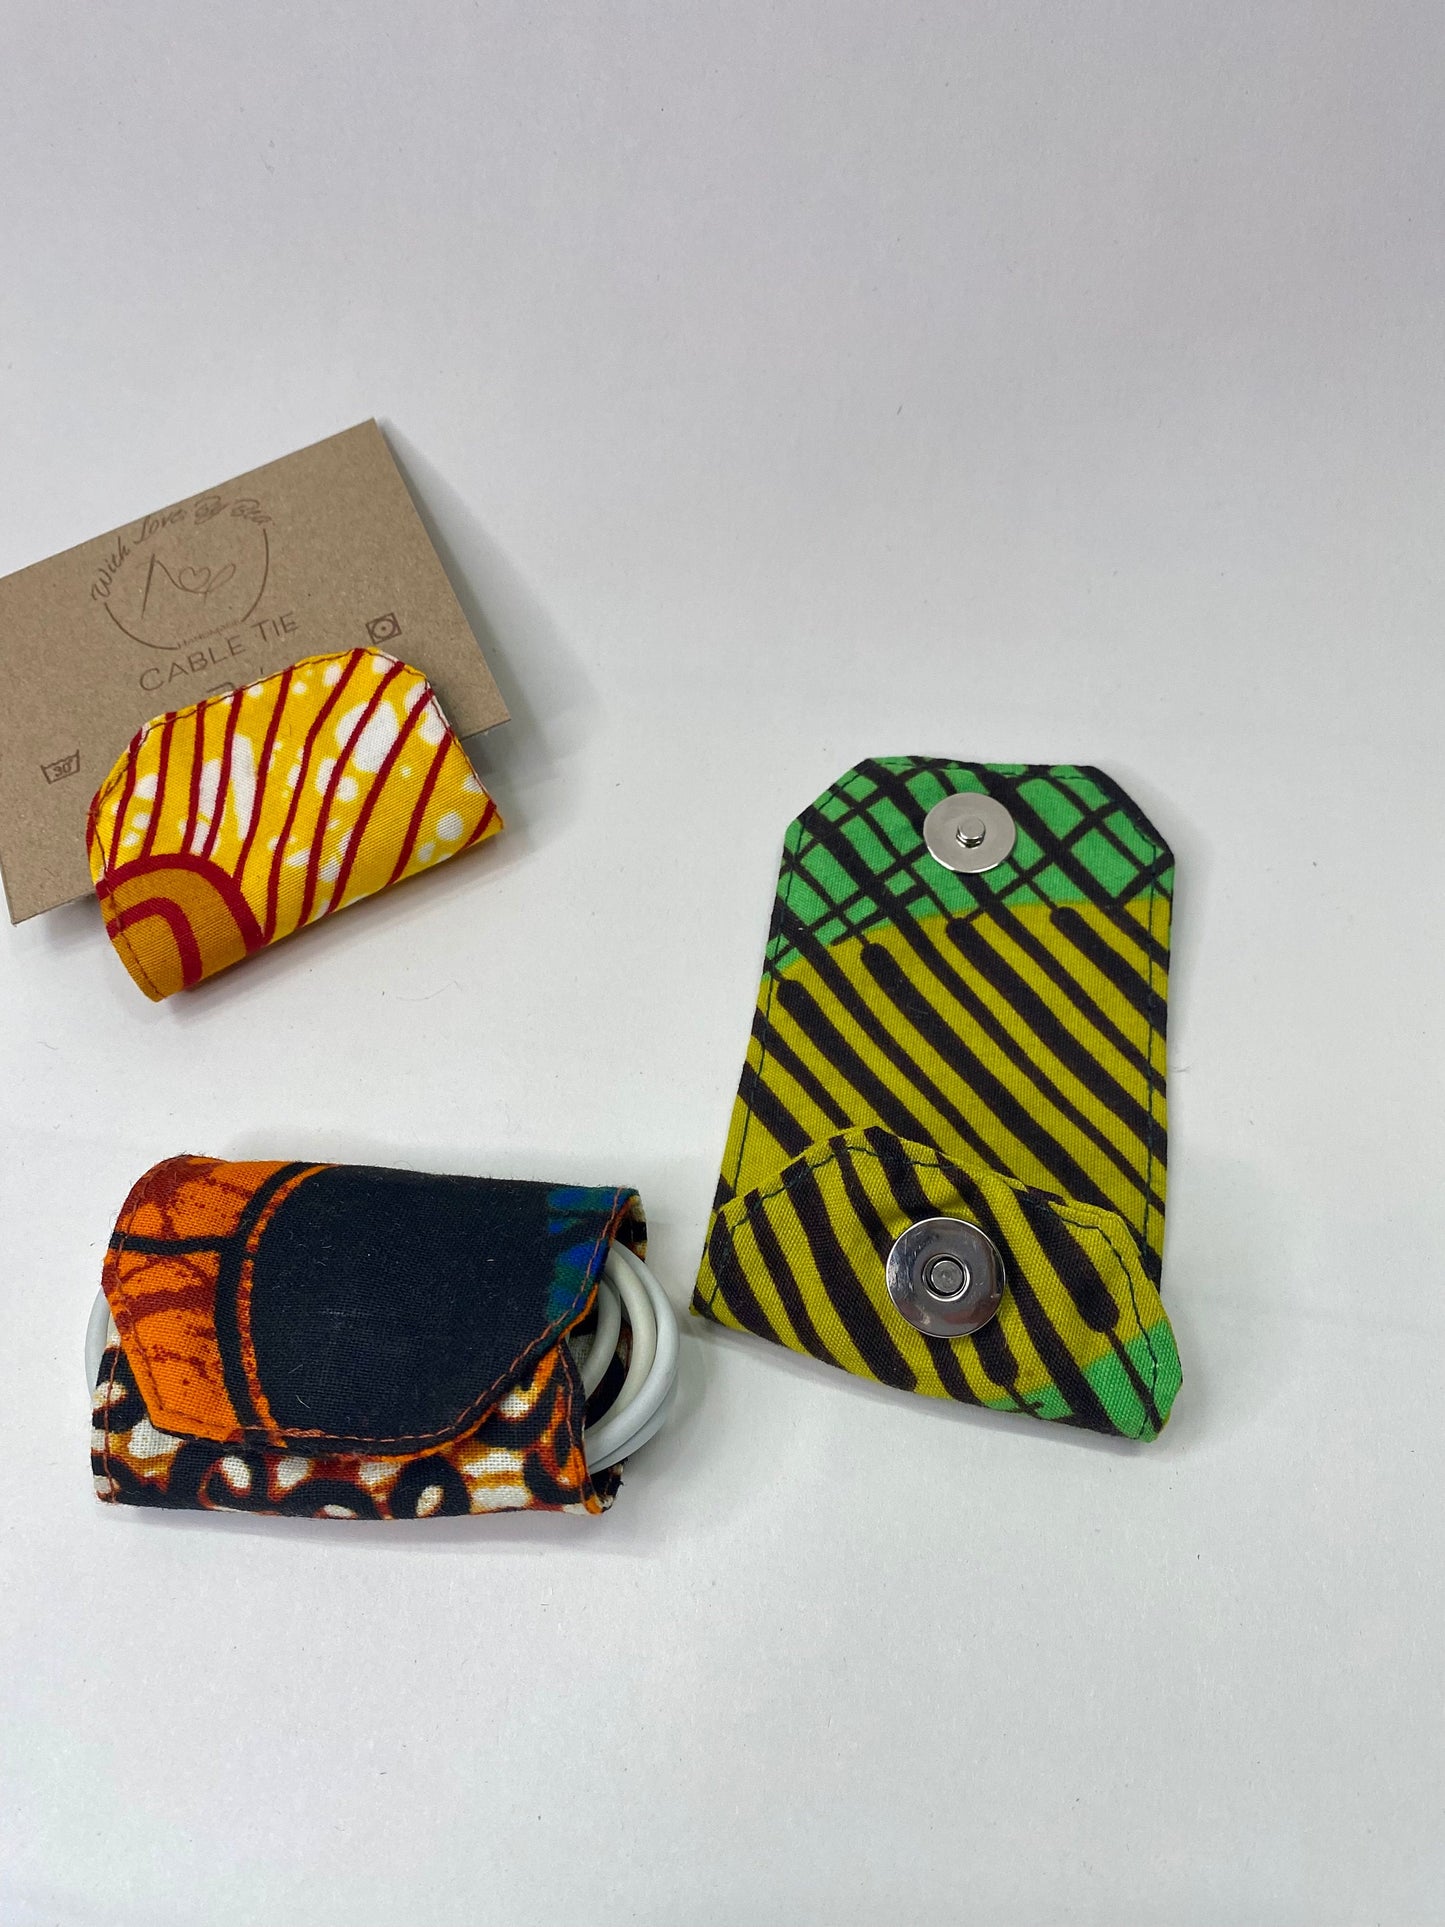 African Print Cable Organiser, Cable Tidy